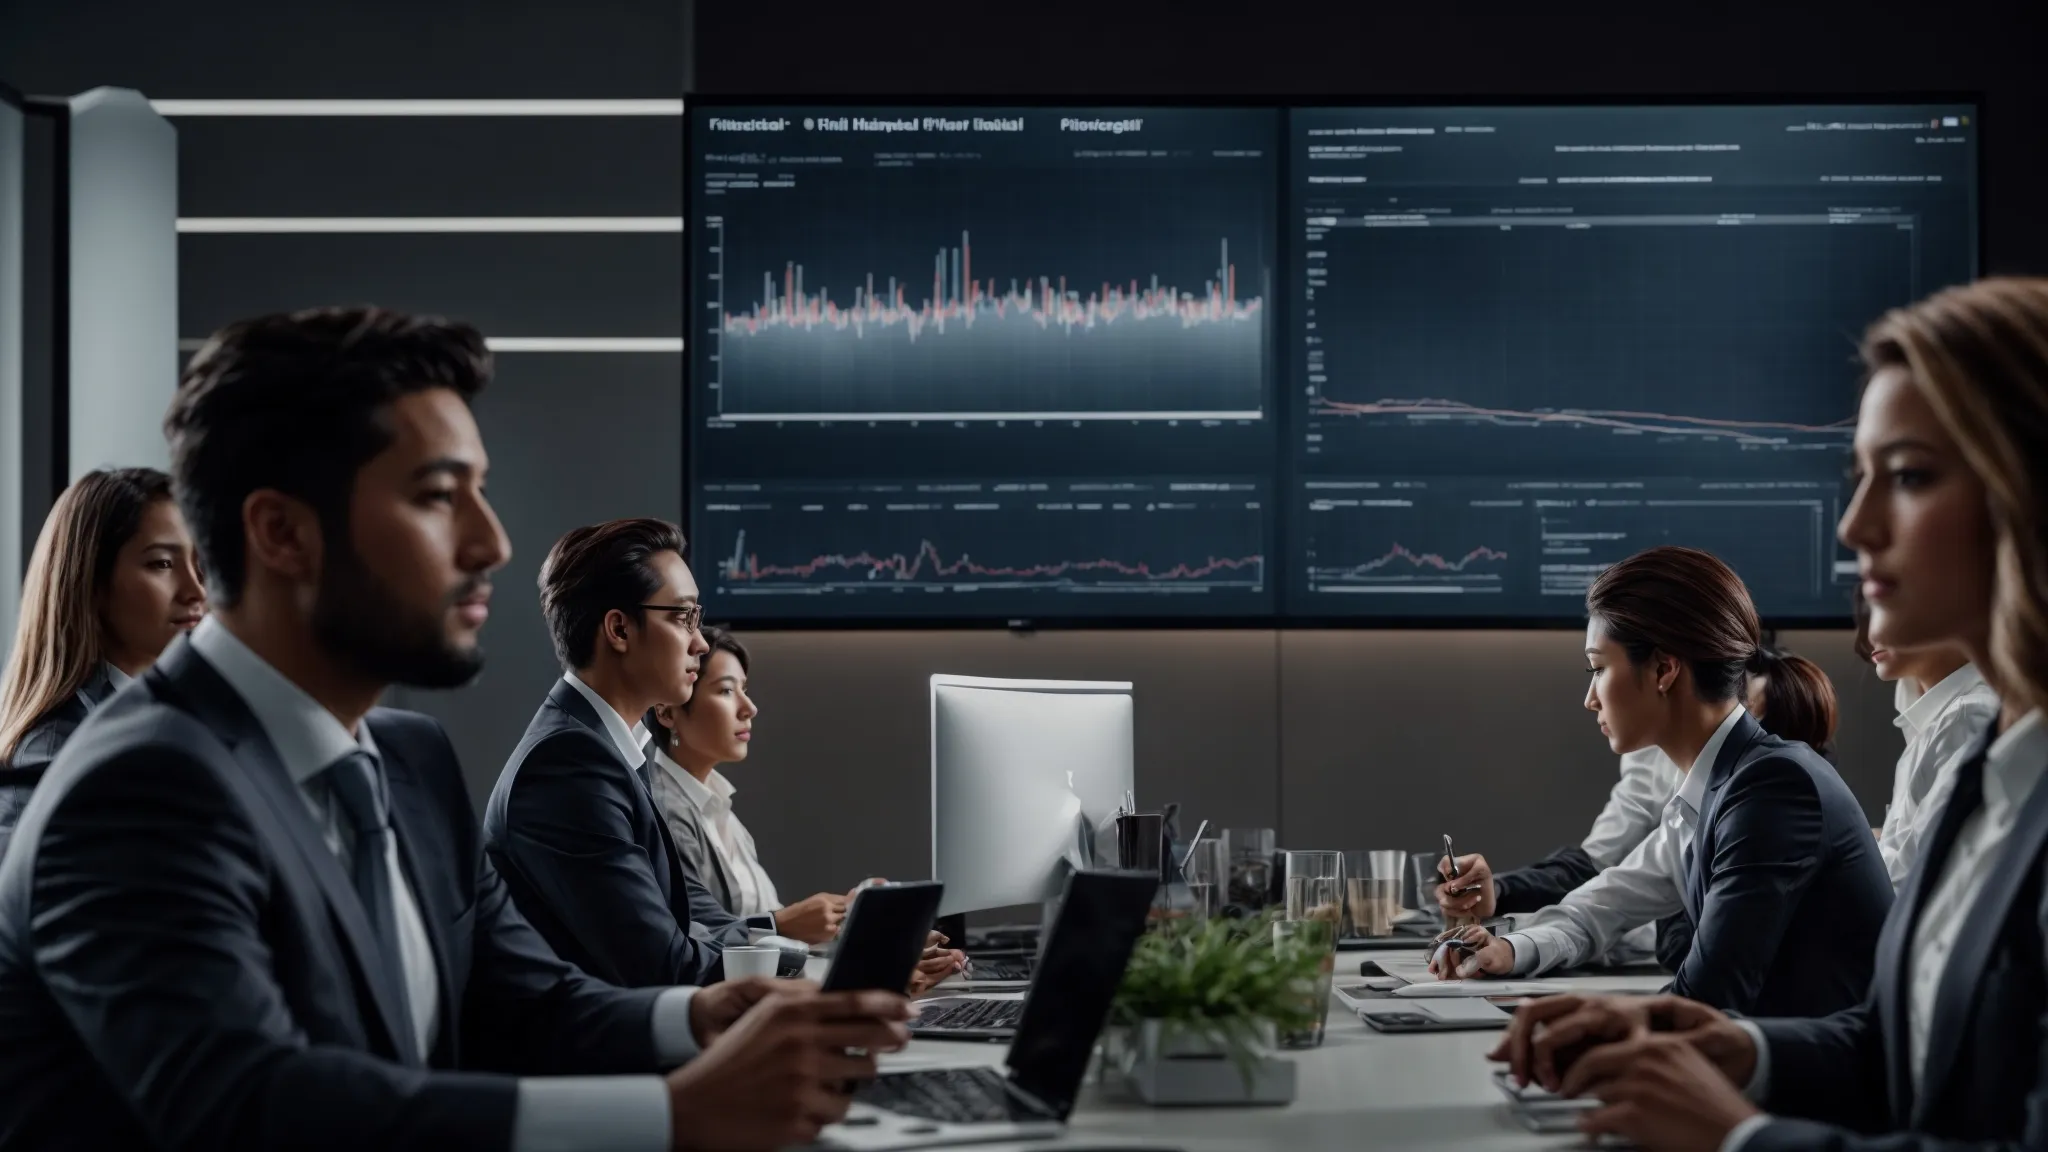 a group of business professionals analyzing data visualizations on a large monitor in a modern office setting.